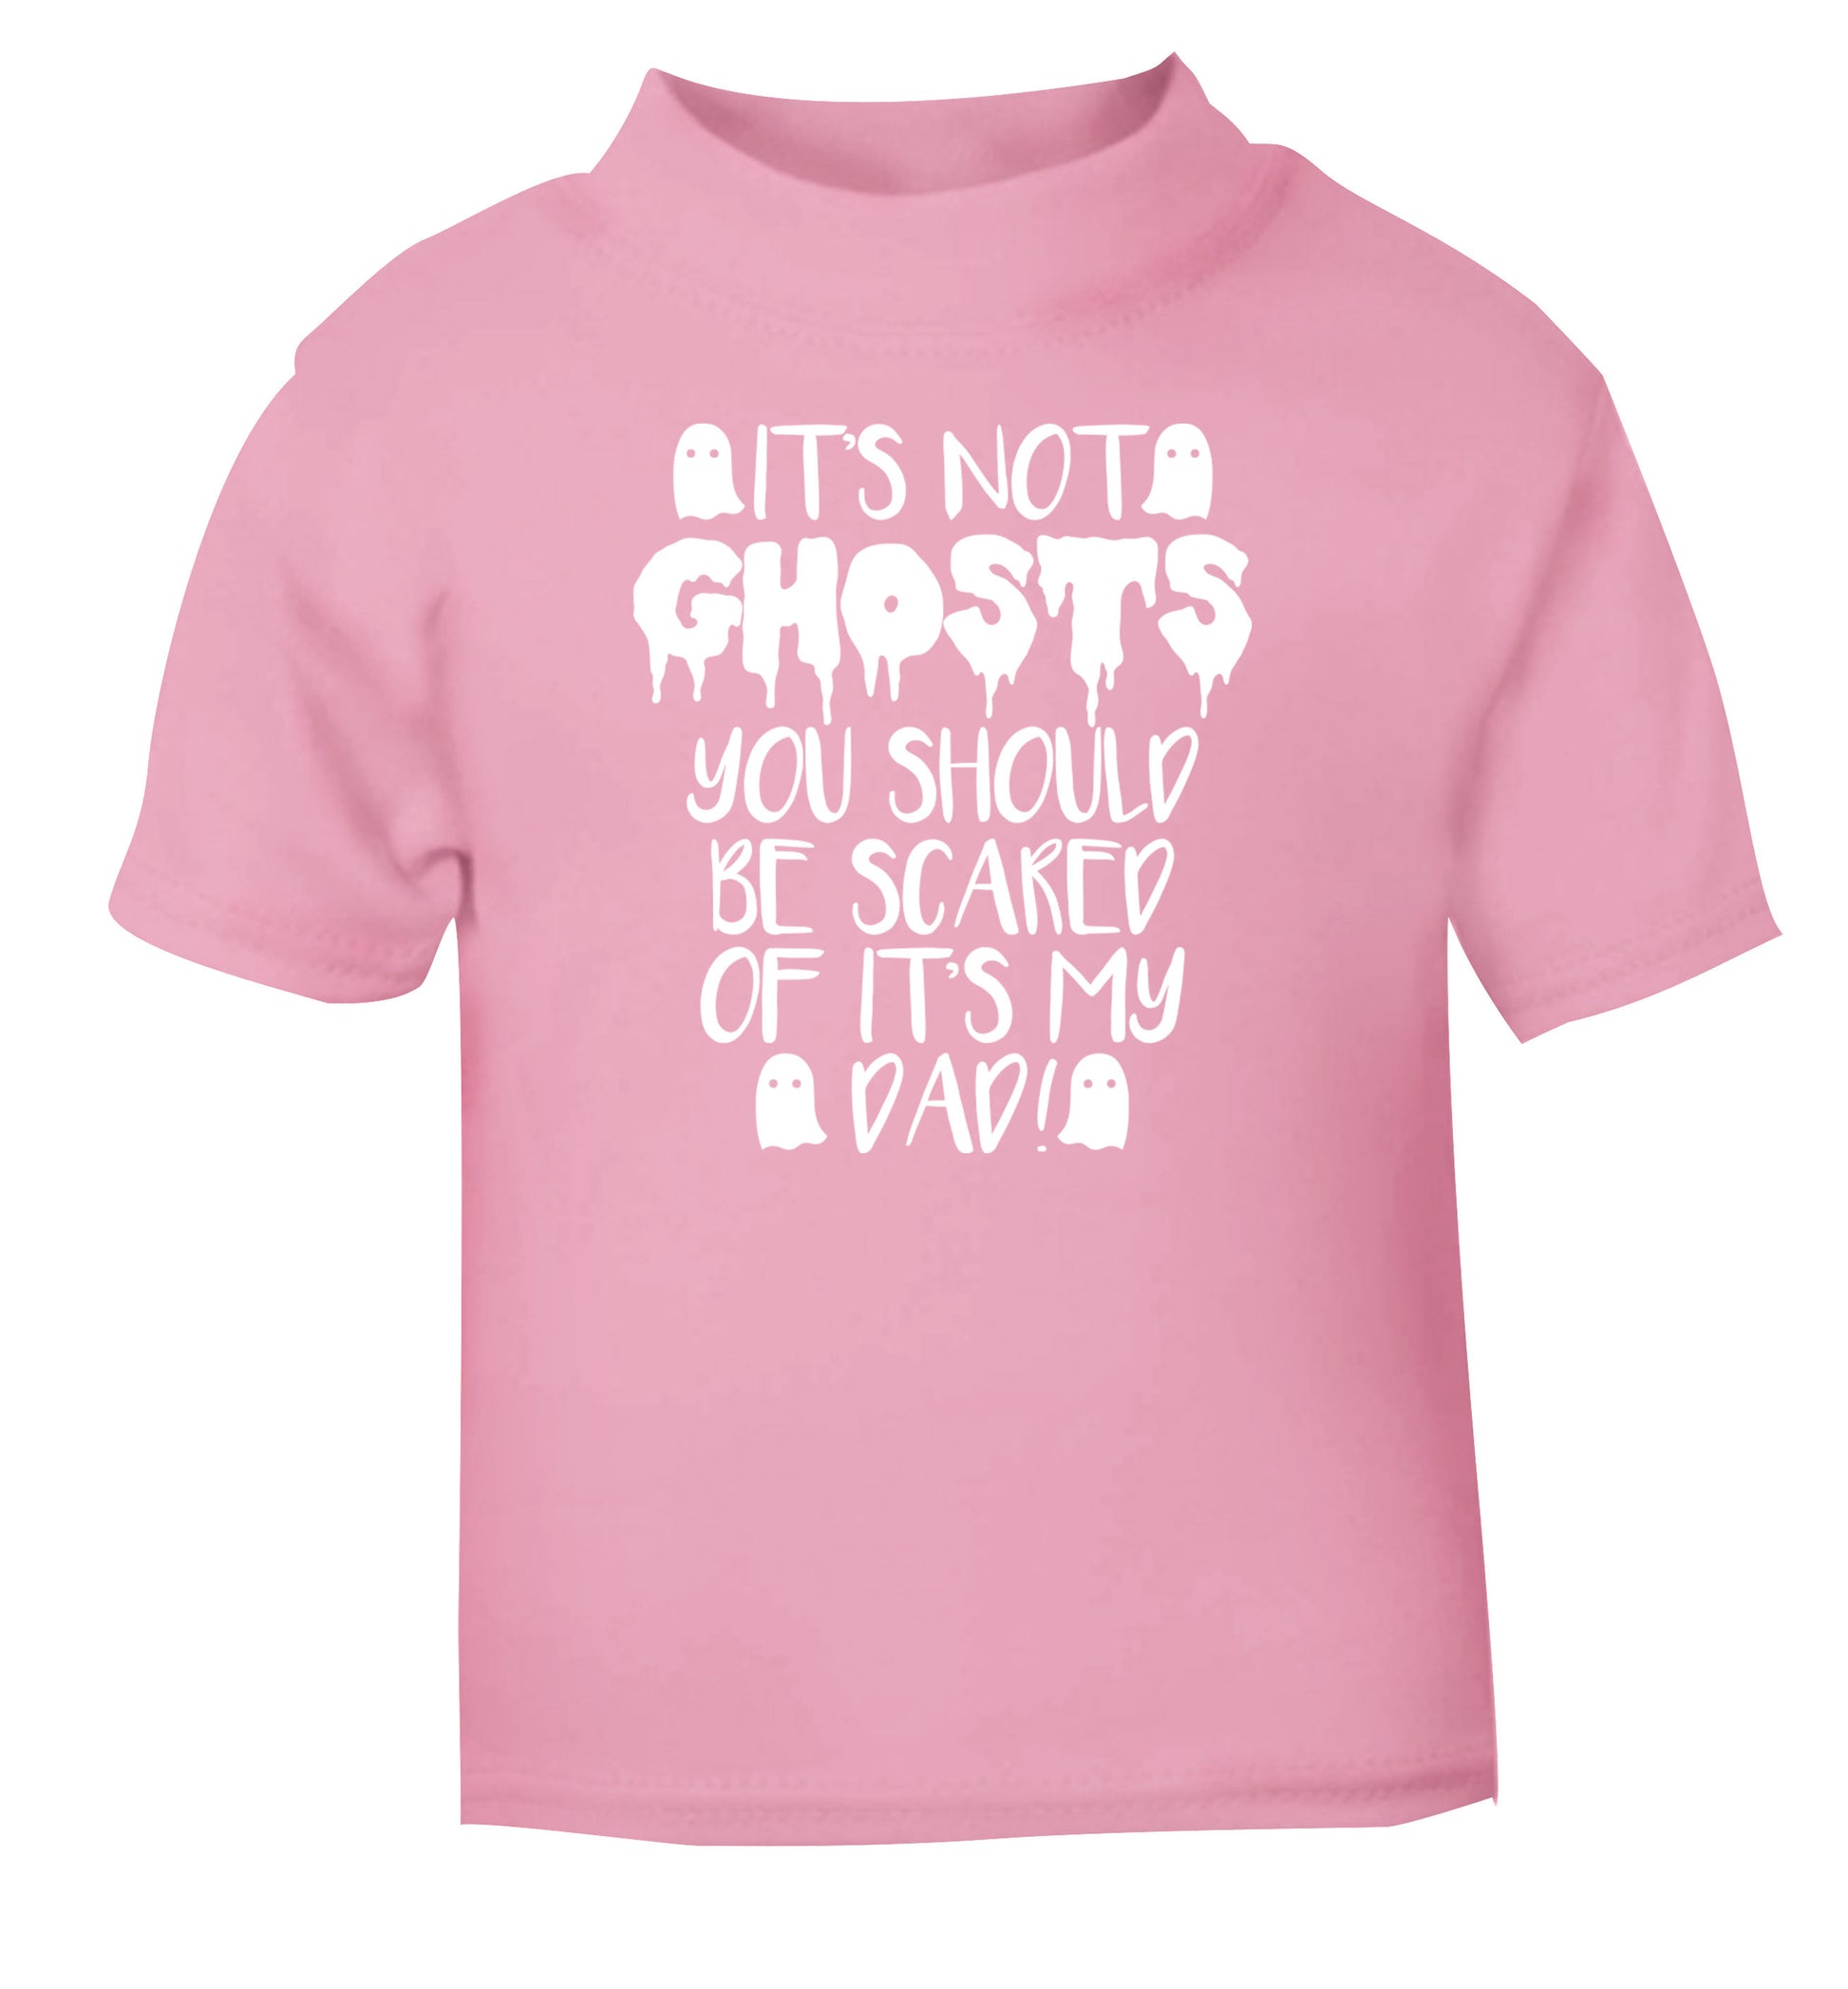 It's not ghosts you should be scared of it's my dad! light pink Baby Toddler Tshirt 2 Years